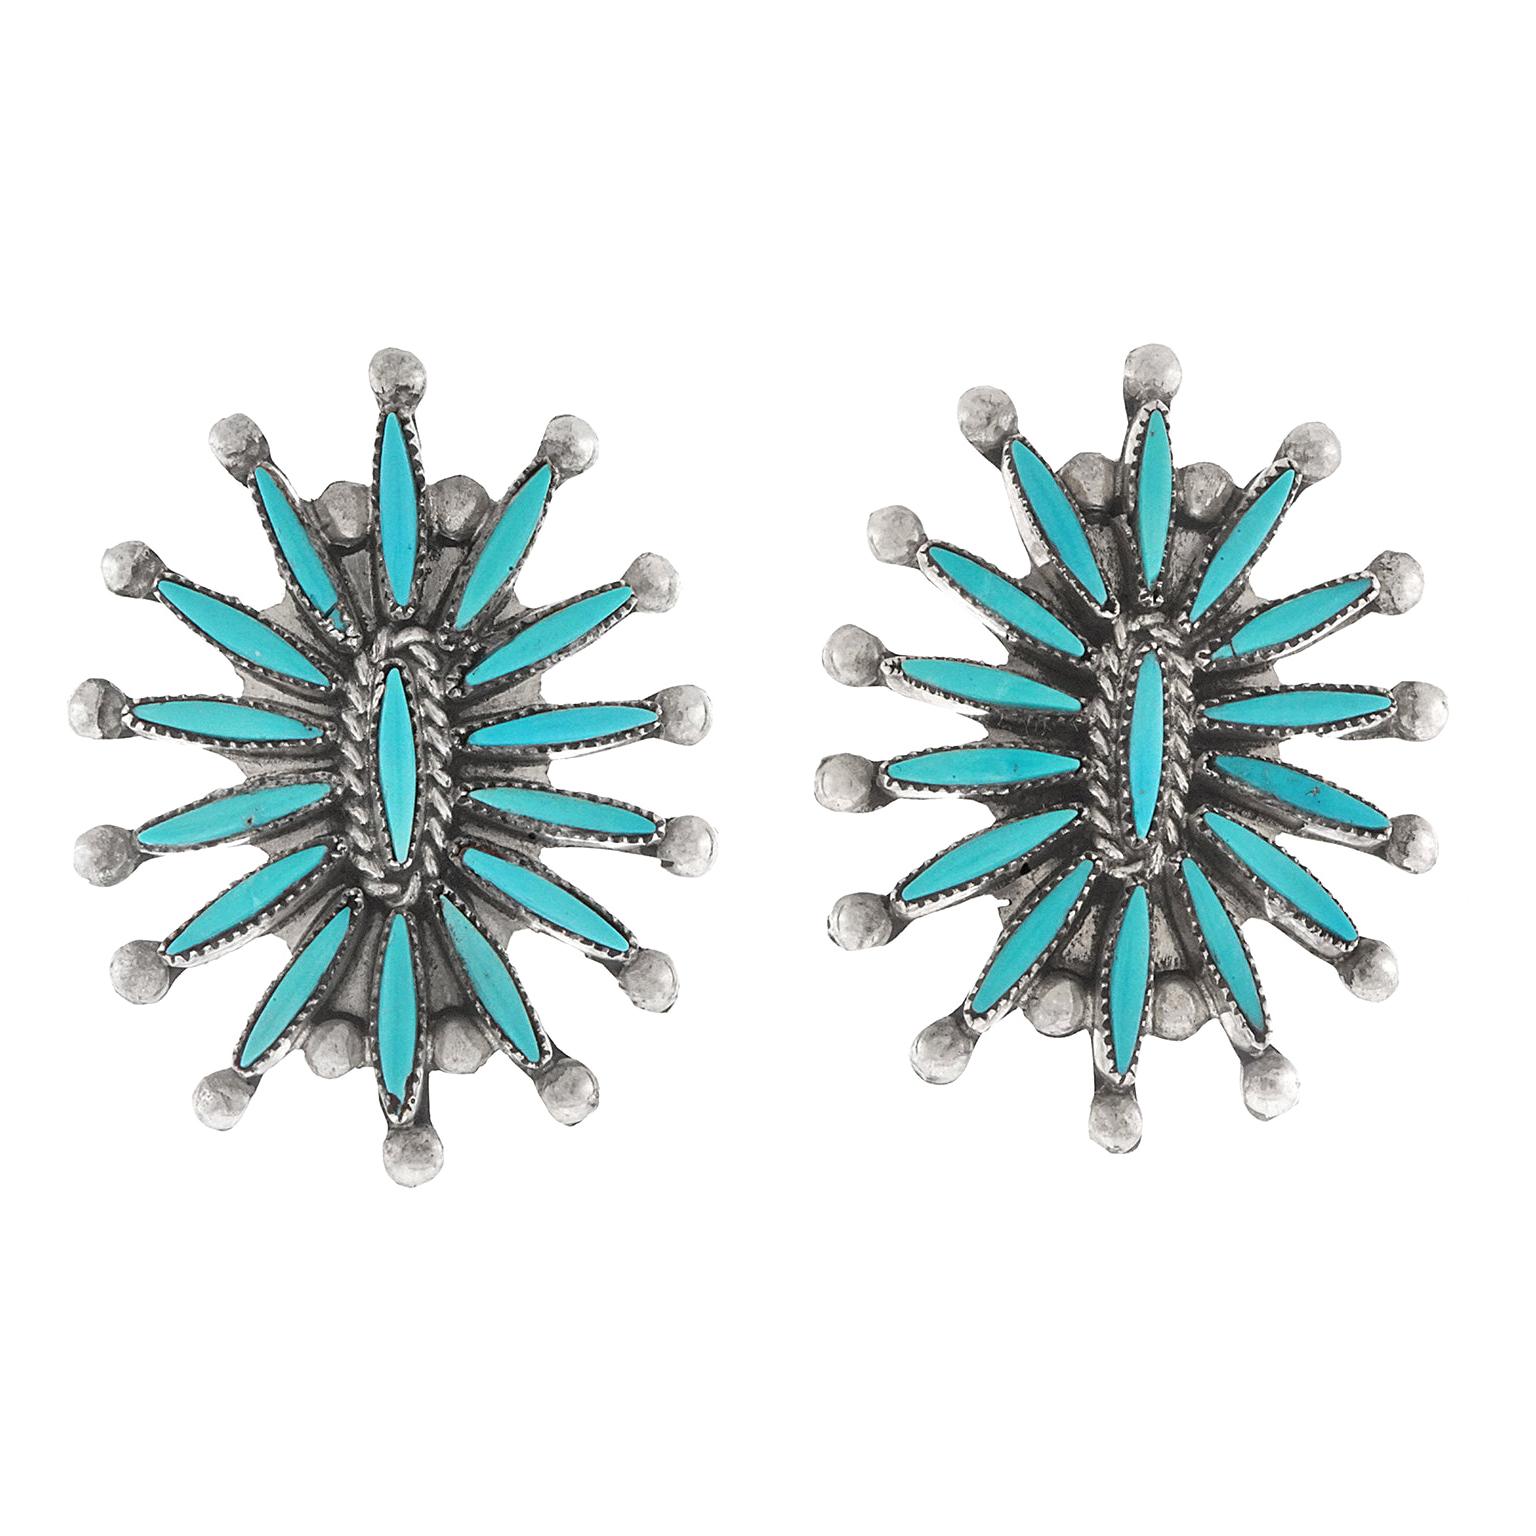 Zuni Turquoise and Sterling Earrings, circa 1970s